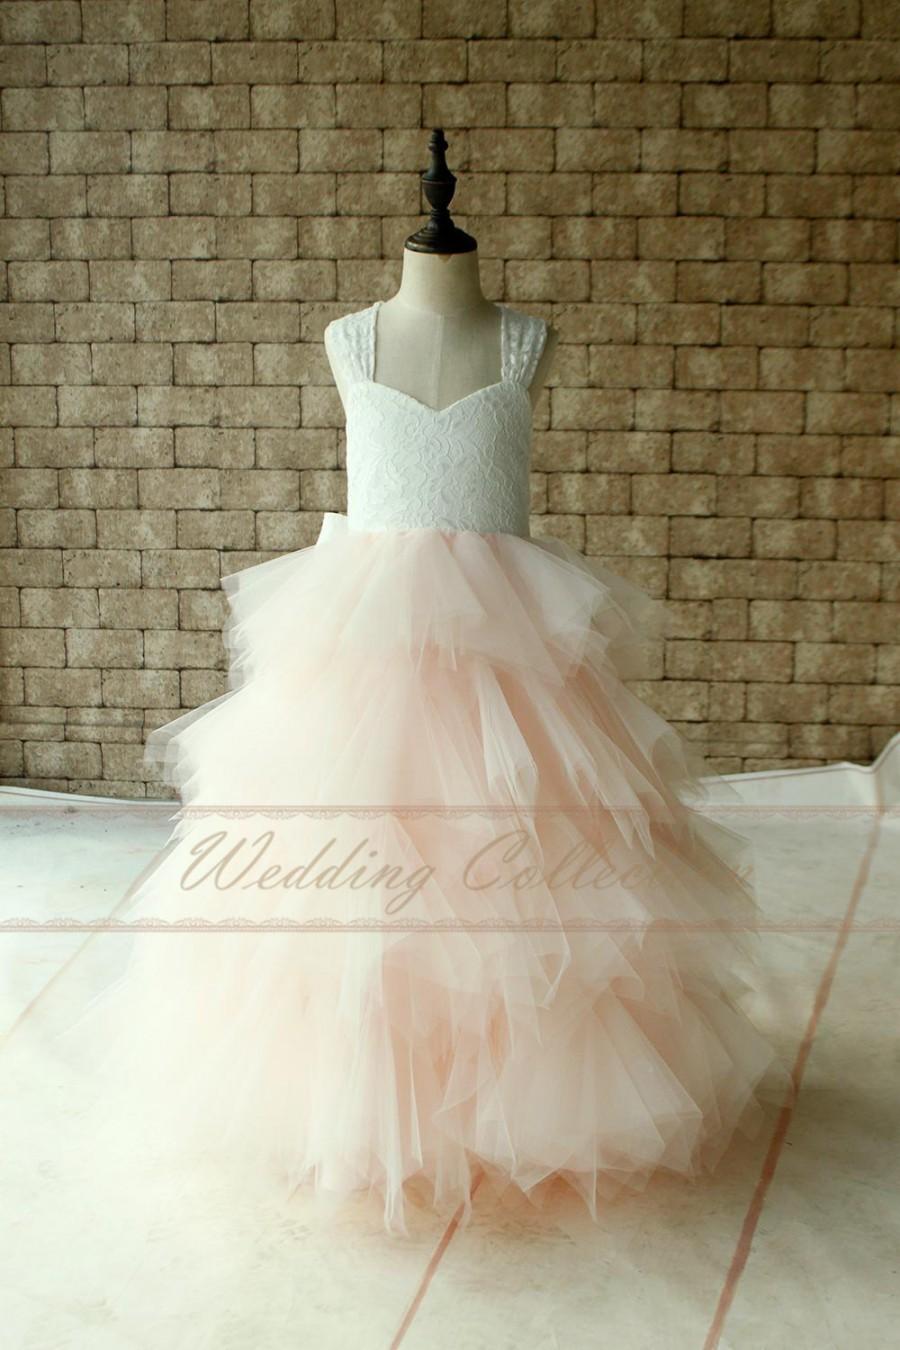 Wedding - Ivory Lace Top with Light Pink Skirt Flower Girl Dress Cross Back Tulle Ball Gown Floor Length